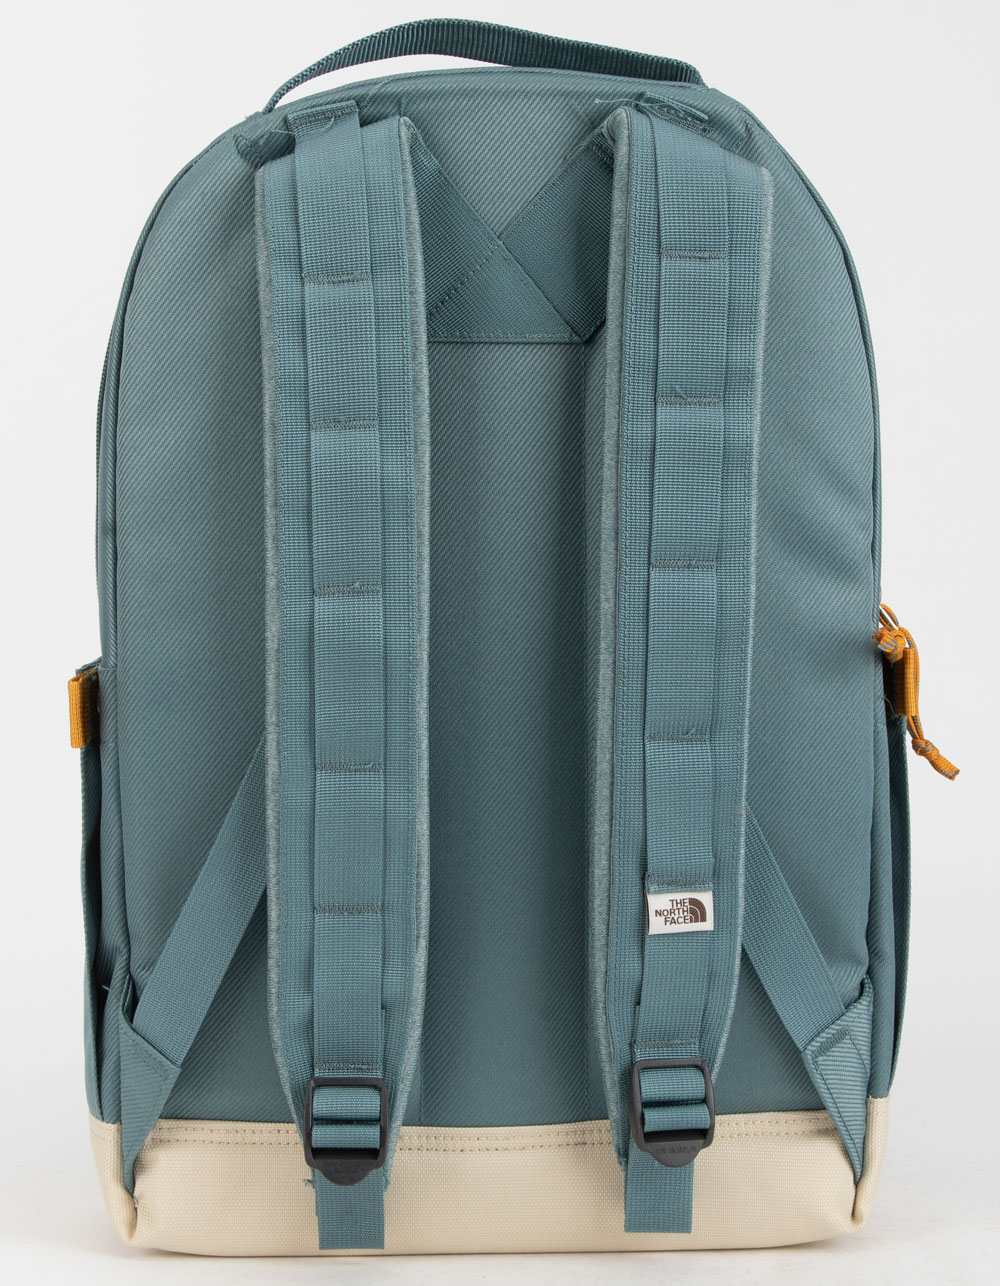 THE NORTH FACE Daypack Backpack - BLUE COMBO | Tillys